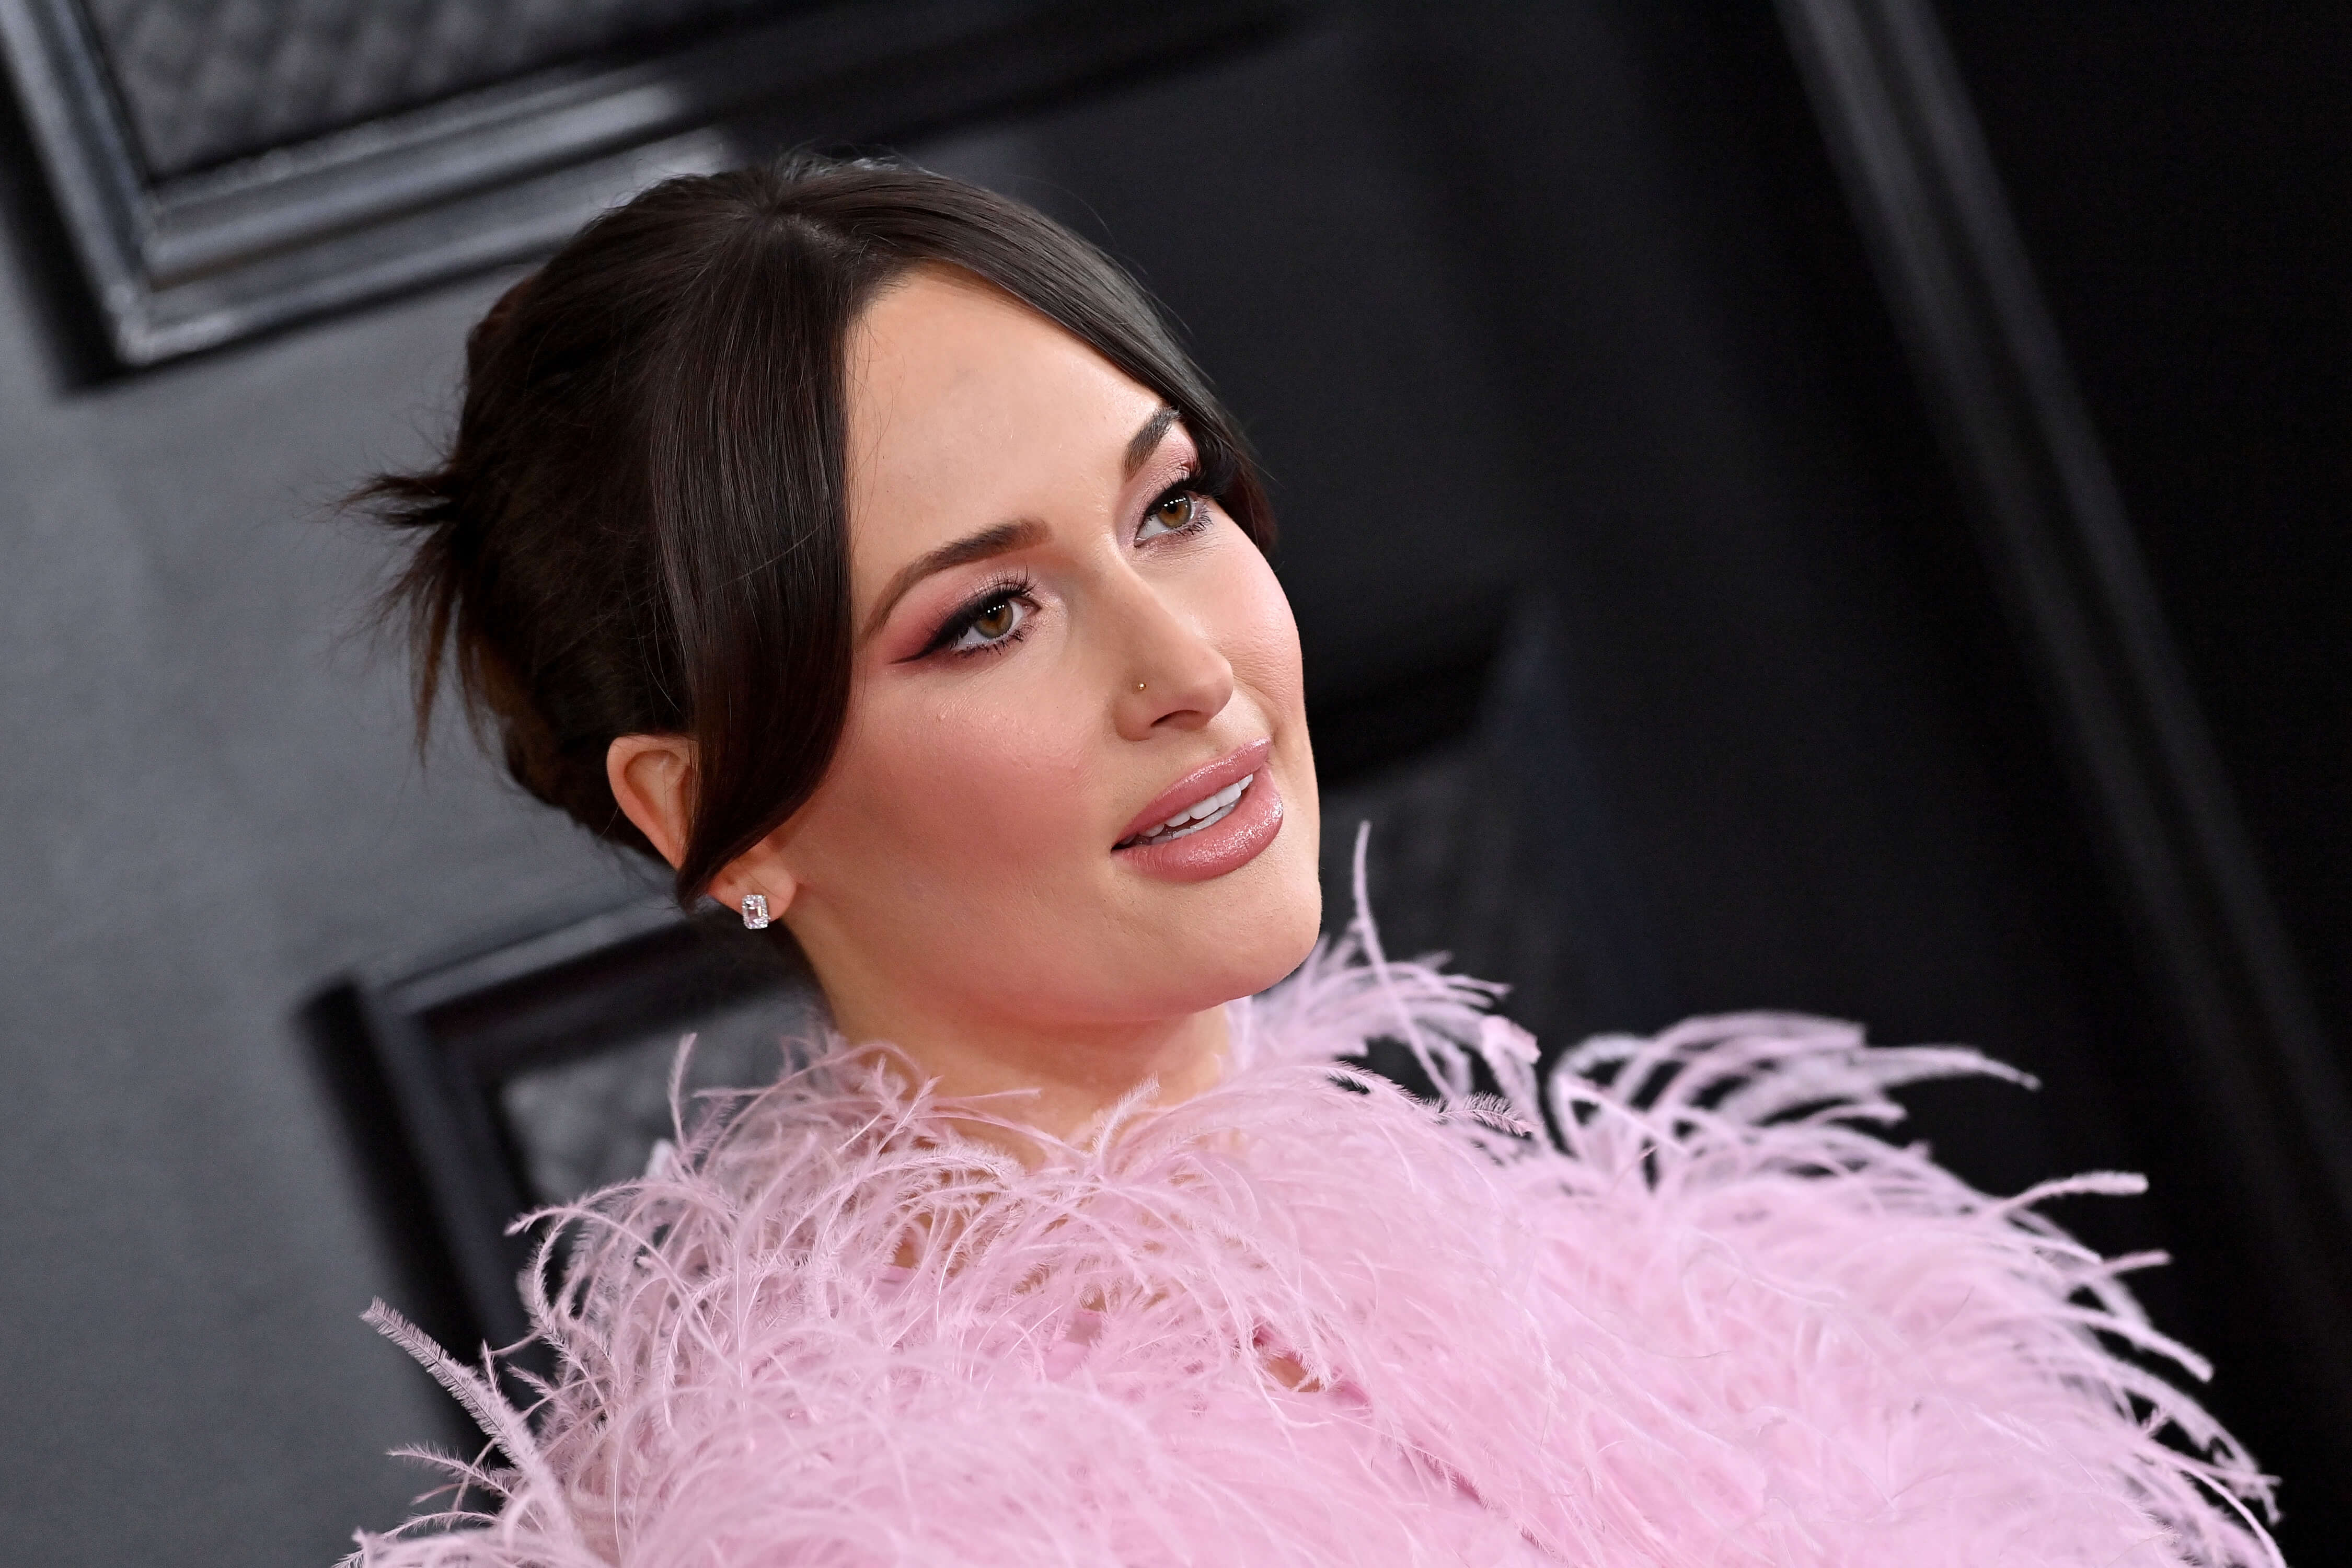 Kacey Musgraves attends the 65th GRAMMY Awards at Crypto.com Arena on February 05, 2023 in Los Angeles, California. (Photo by Axelle/Bauer-Griffin/FilmMagic